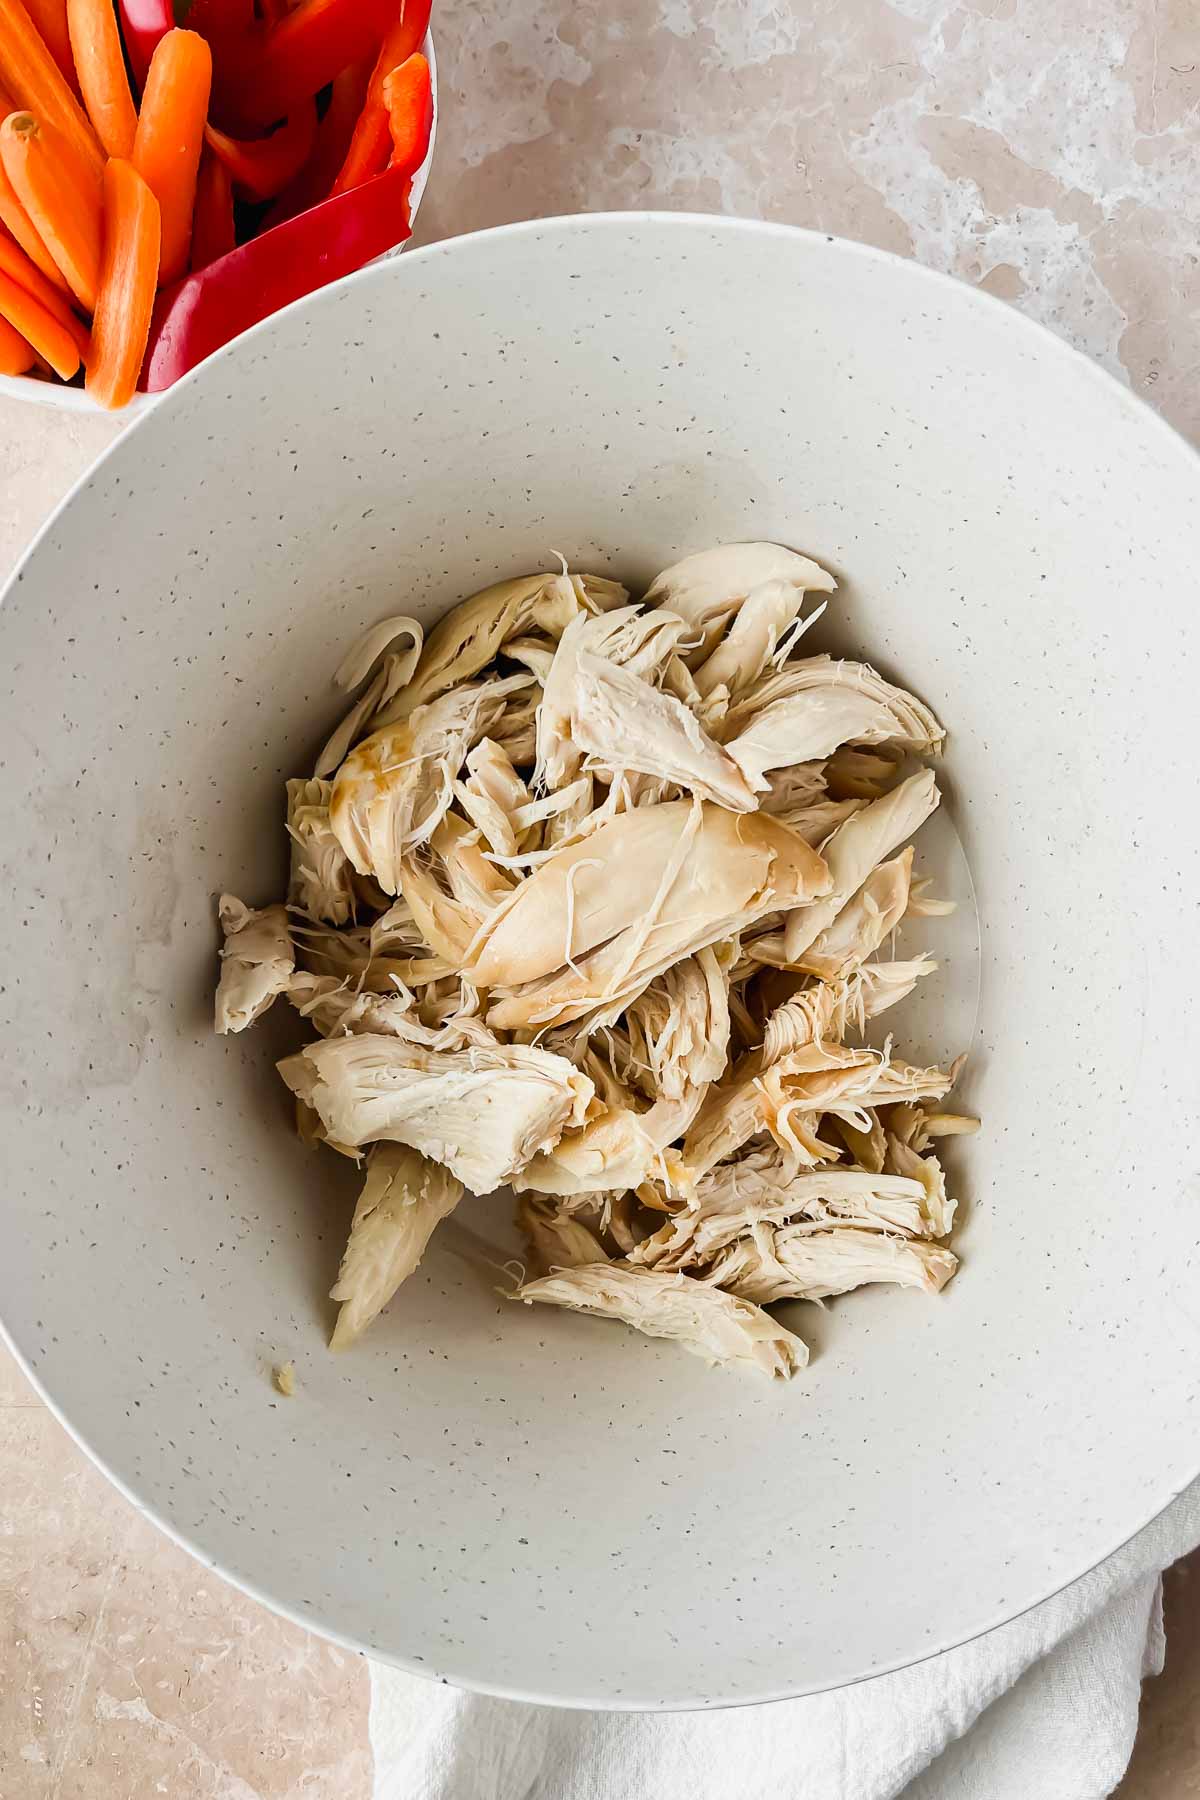 Shredded chicken in a metal mixing bowl.